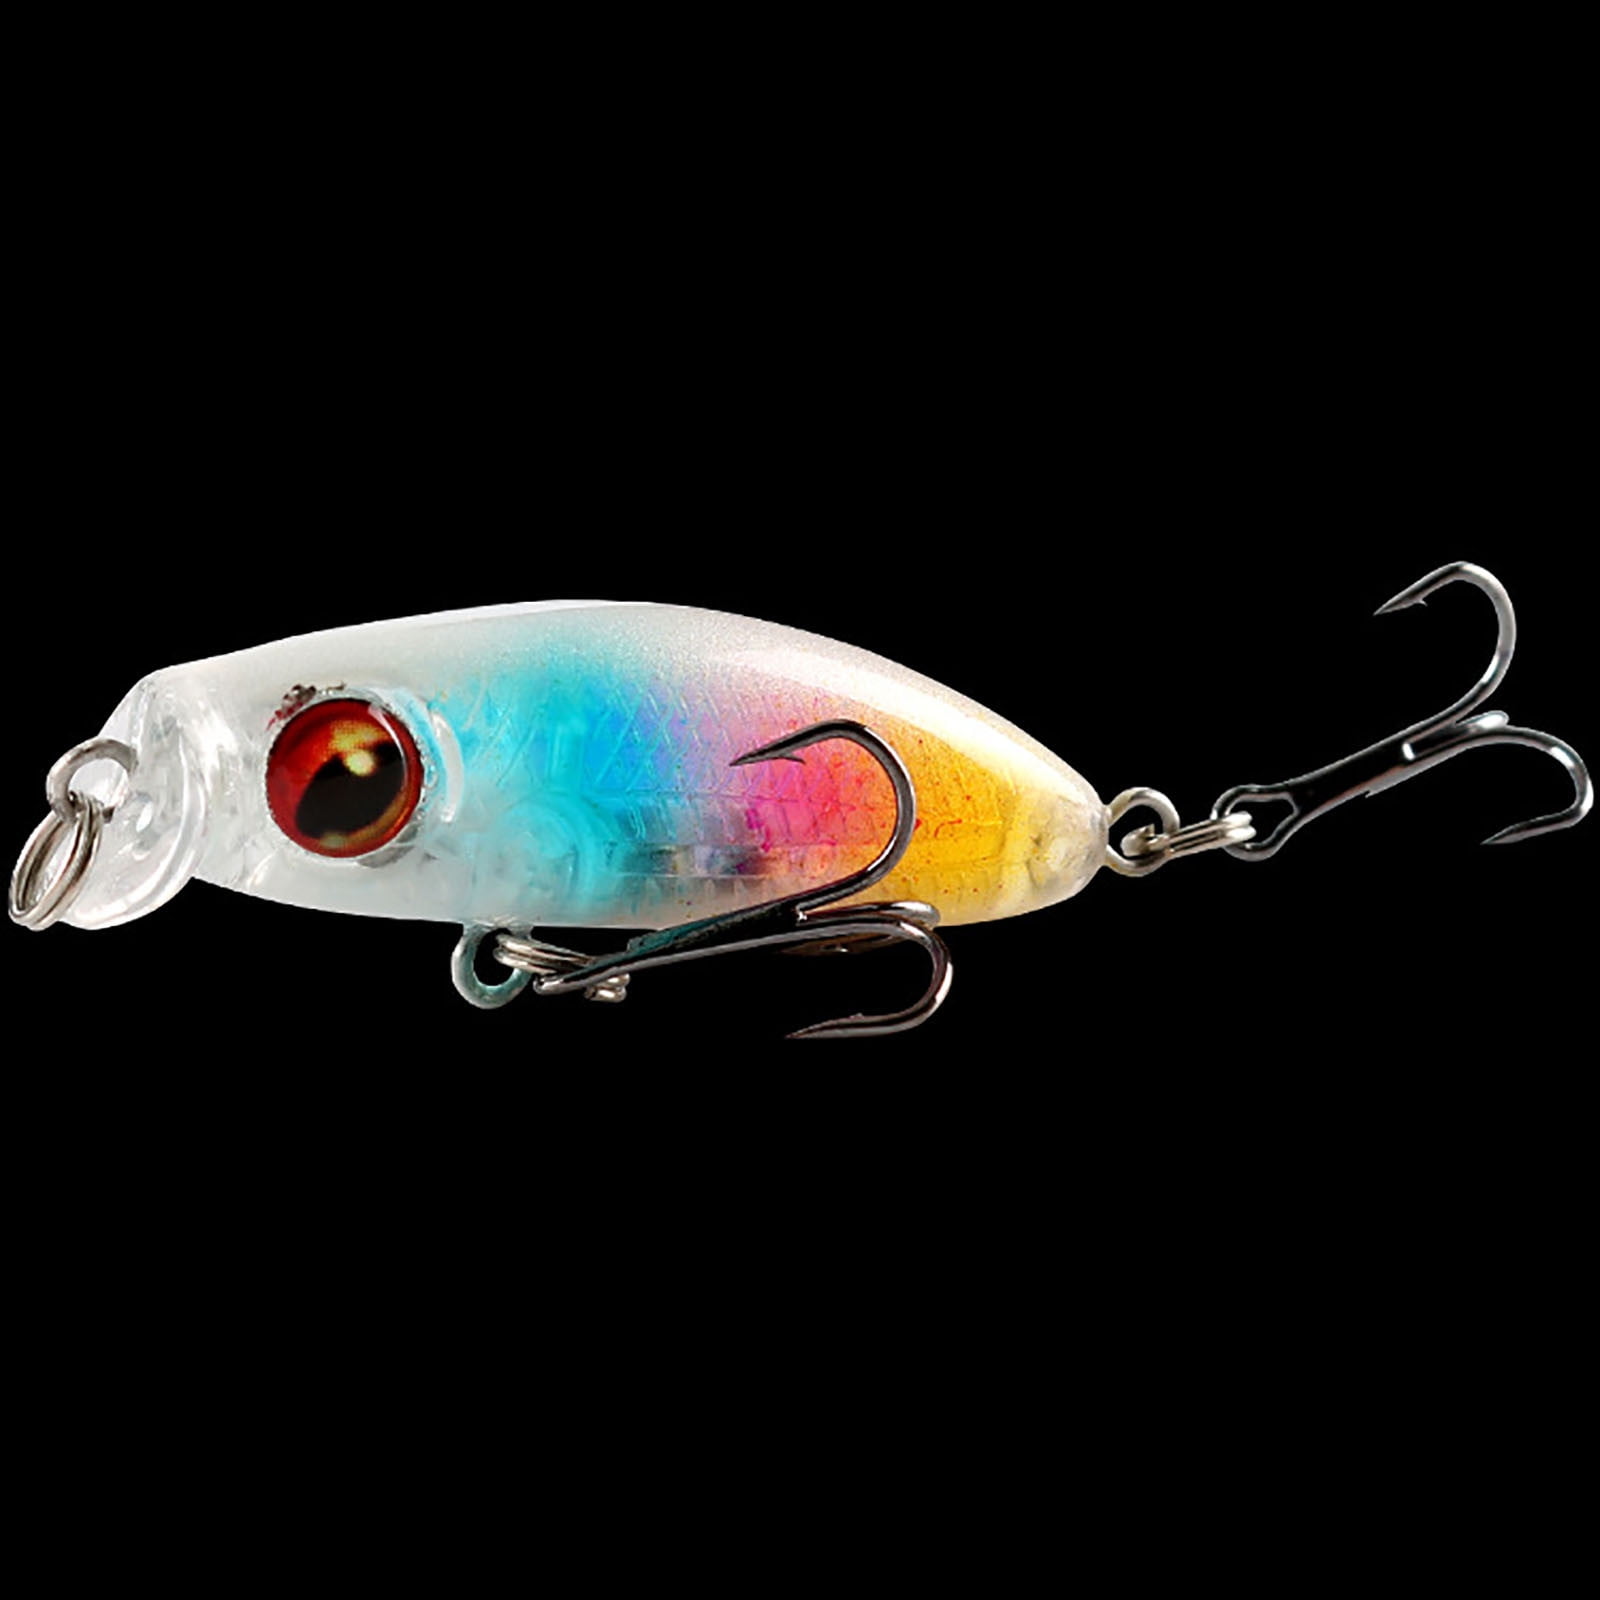 Texas Tackle Factory Double Shad Fishing Lure